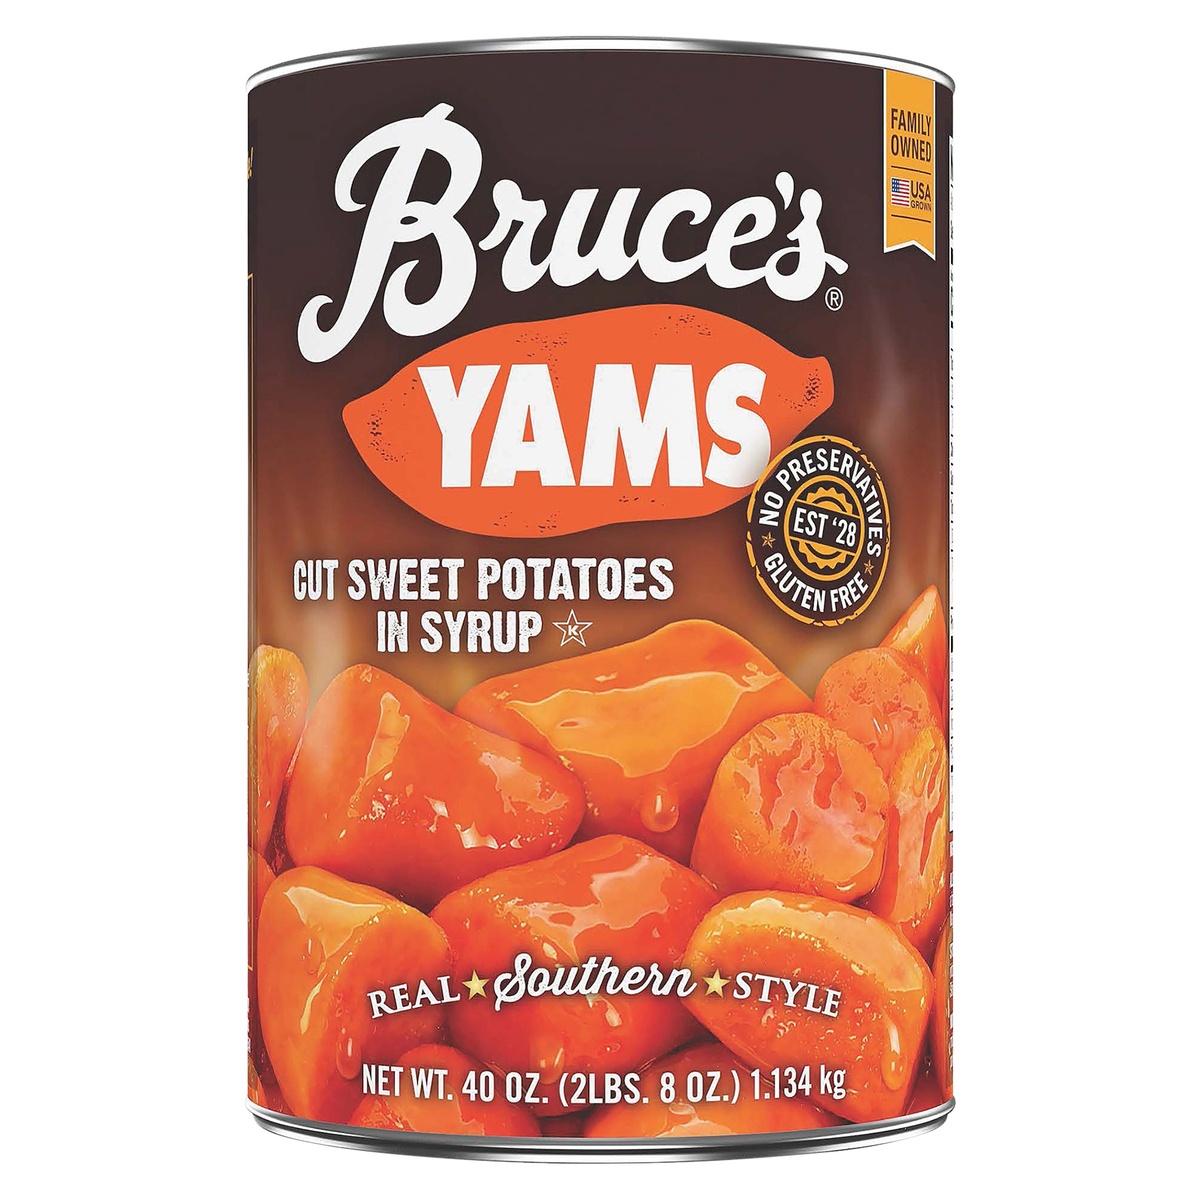 slide 1 of 1, Bruce's Yams Cut Sweet Potatoes in Syrup, 40 oz